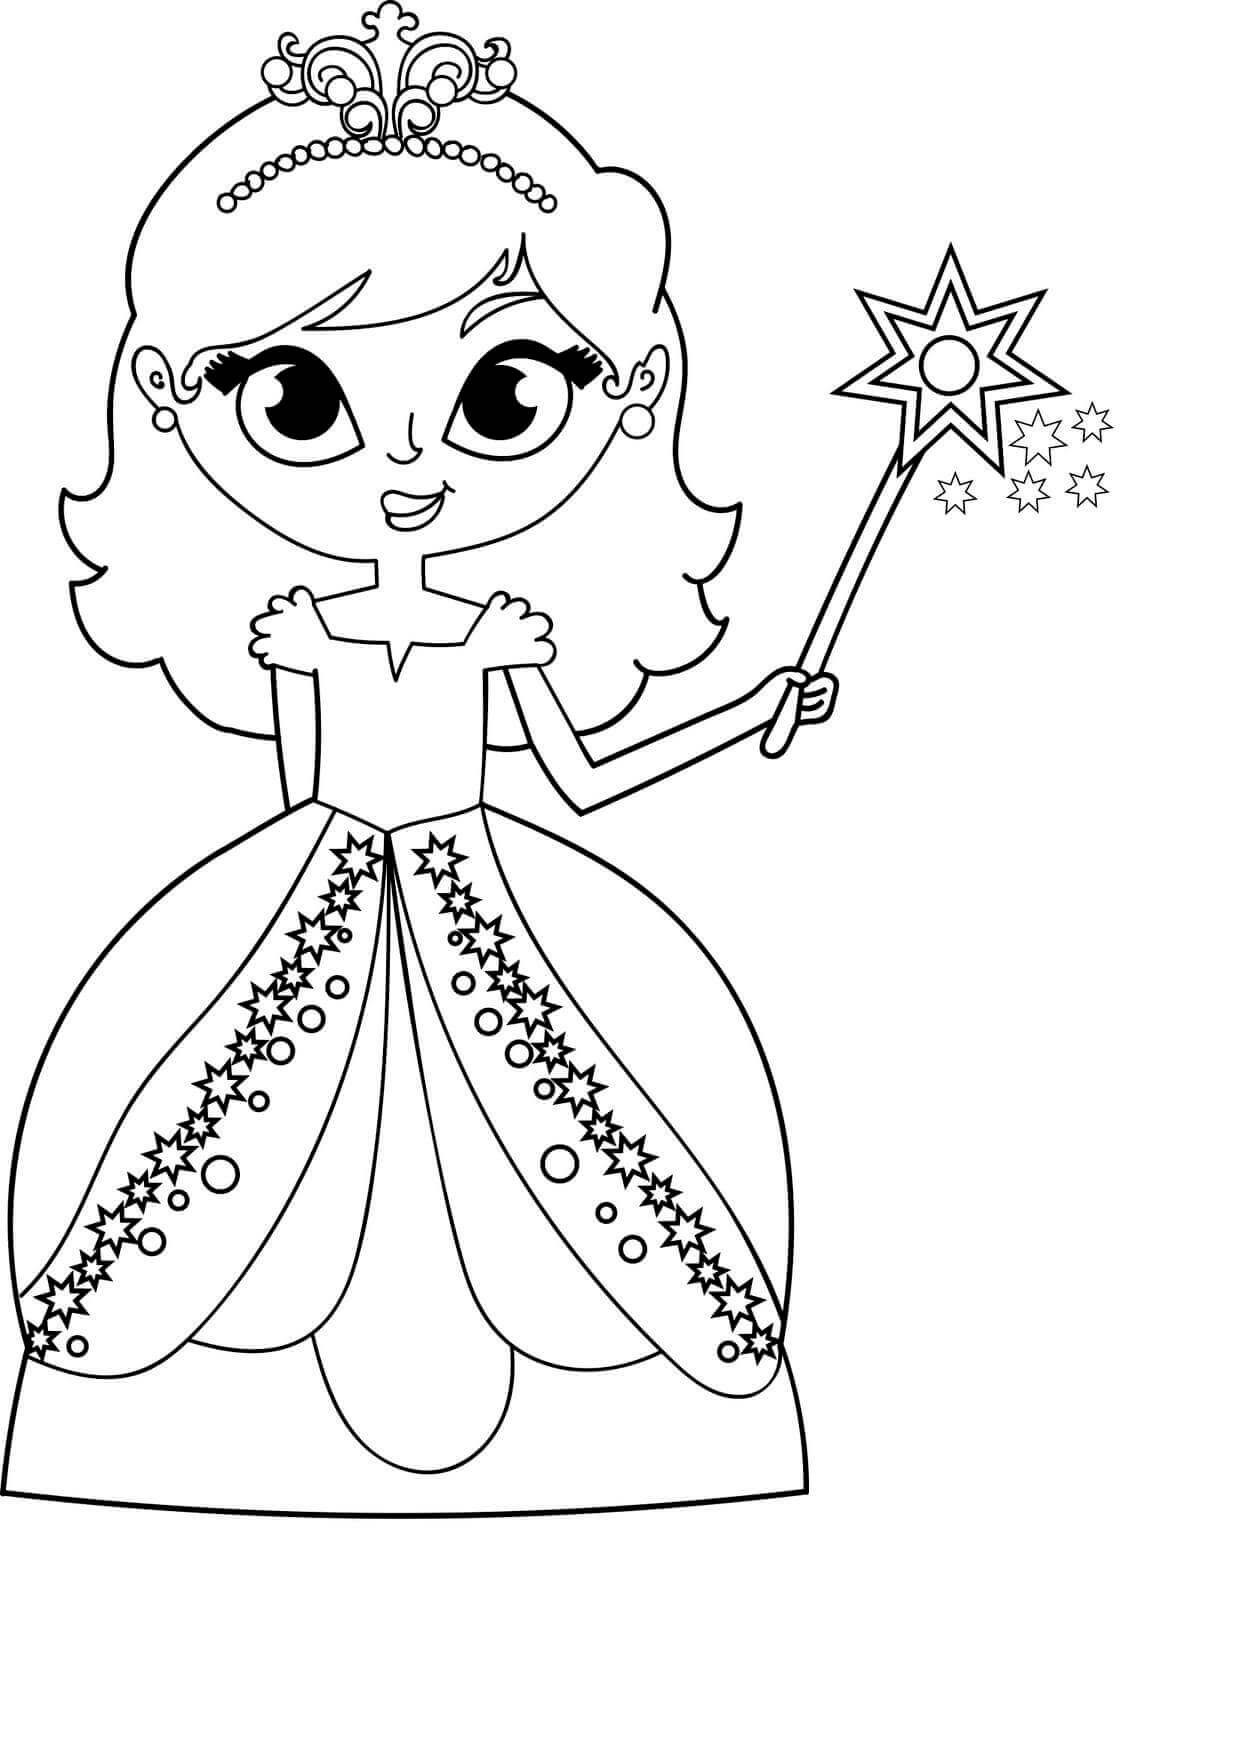 Coloring Sheets Of Girls
 Free Printable Coloring Pages For Girls